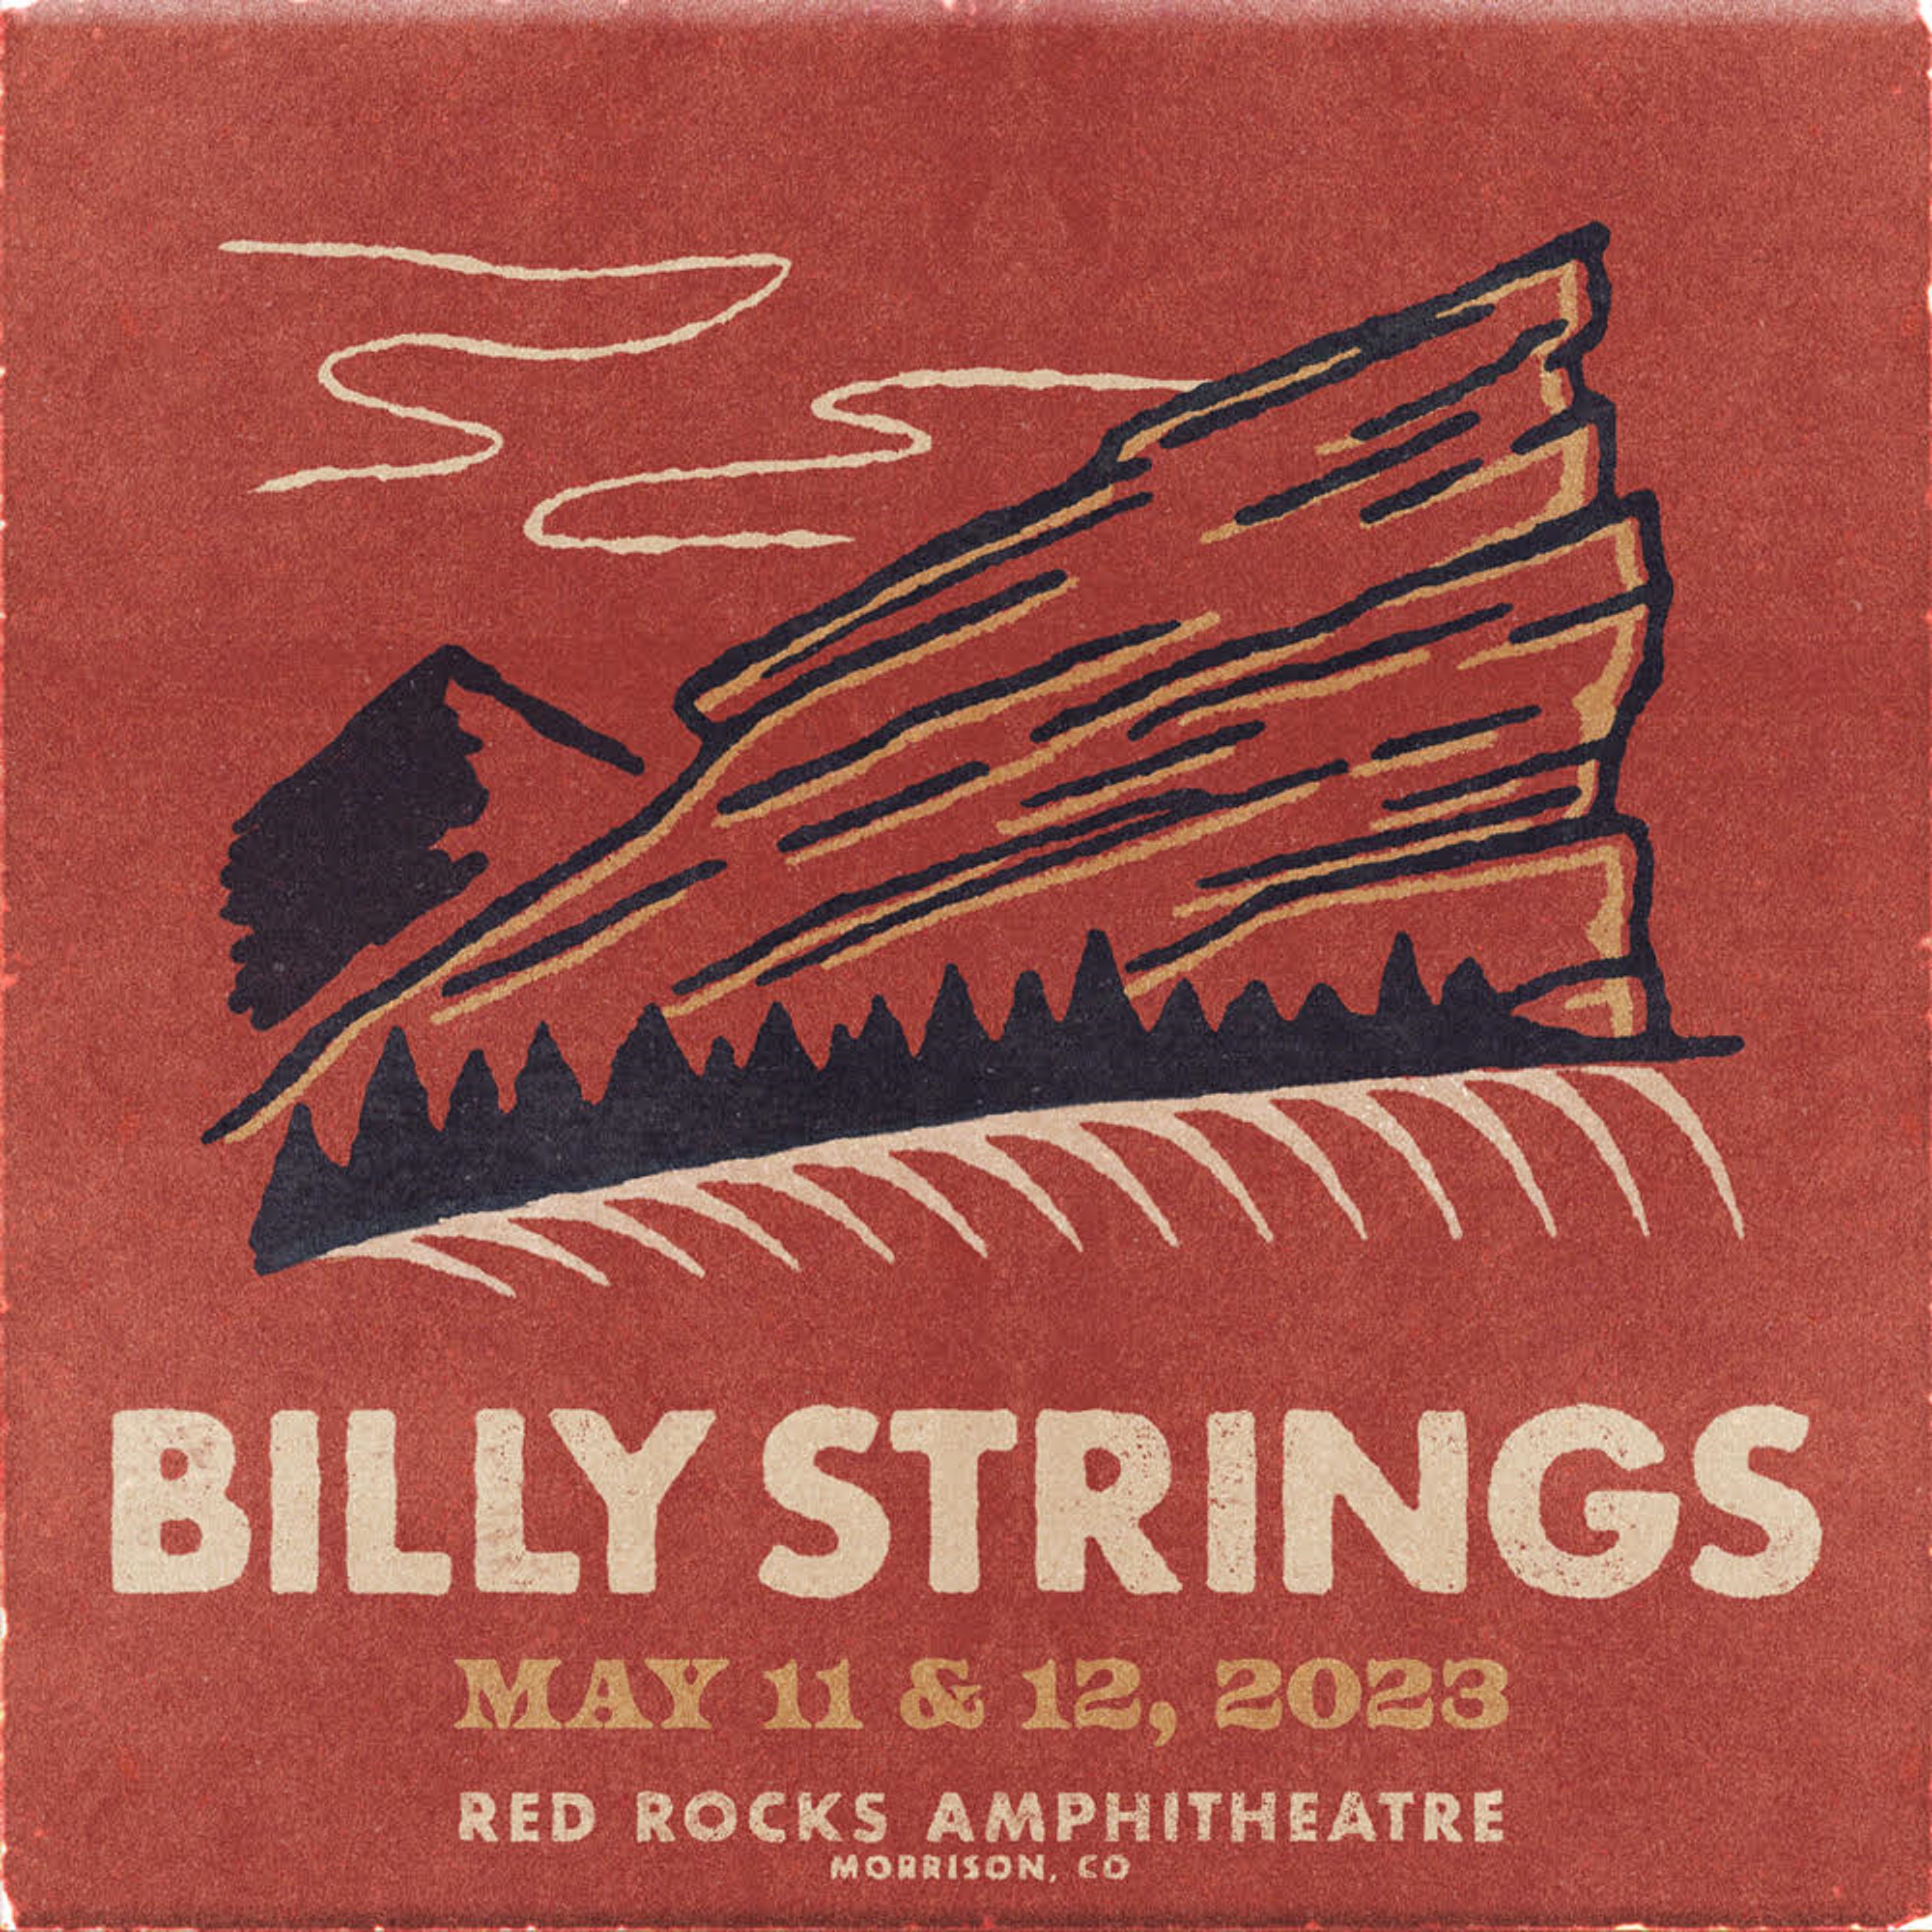 BILLY STRINGS Announce Red Rocks Amphitheatre Shows on Thursday, May 11 & Friday, May 12 2023